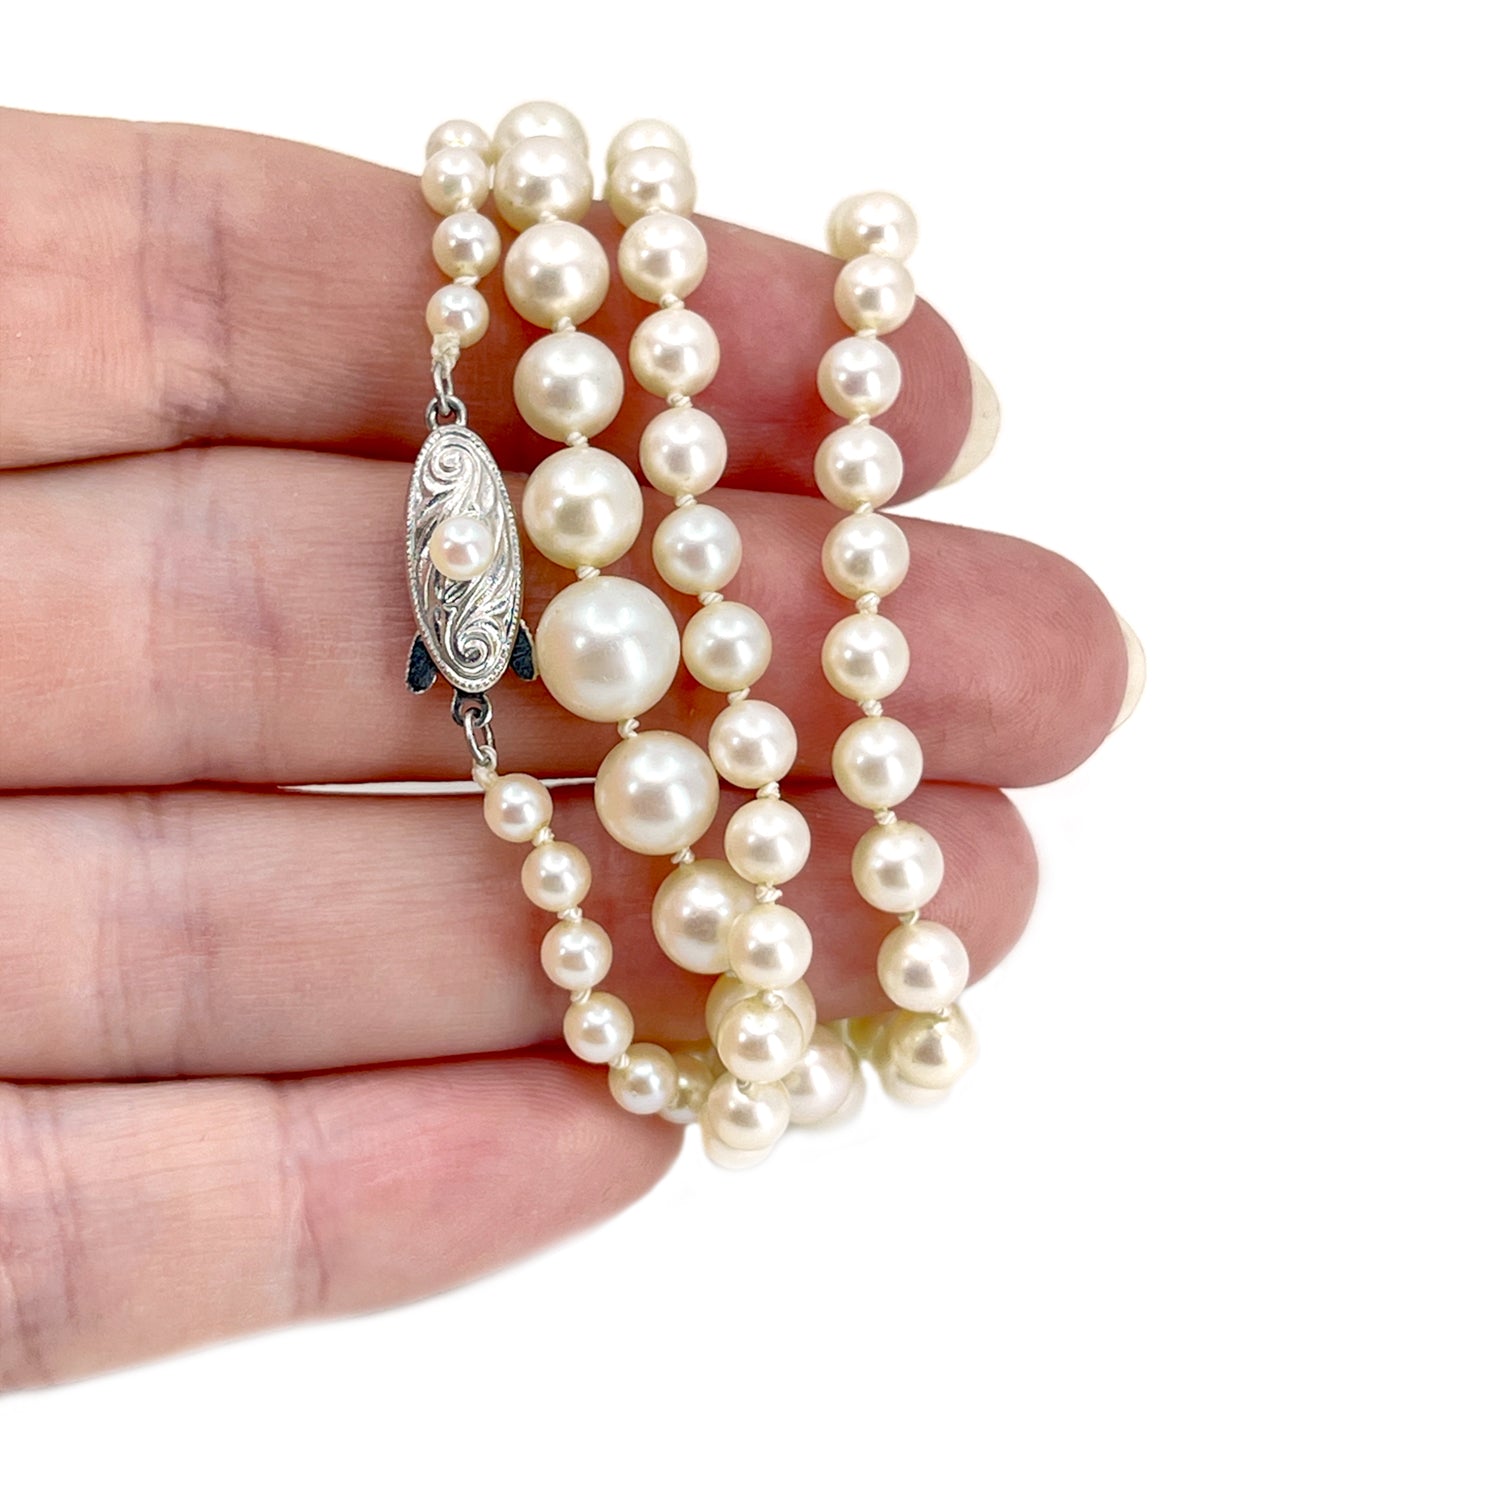 Vintage Graduated Japanese Saltwater Cultured Akoya Pearl Deco Necklace - Sterling Silver 20.75 Inch